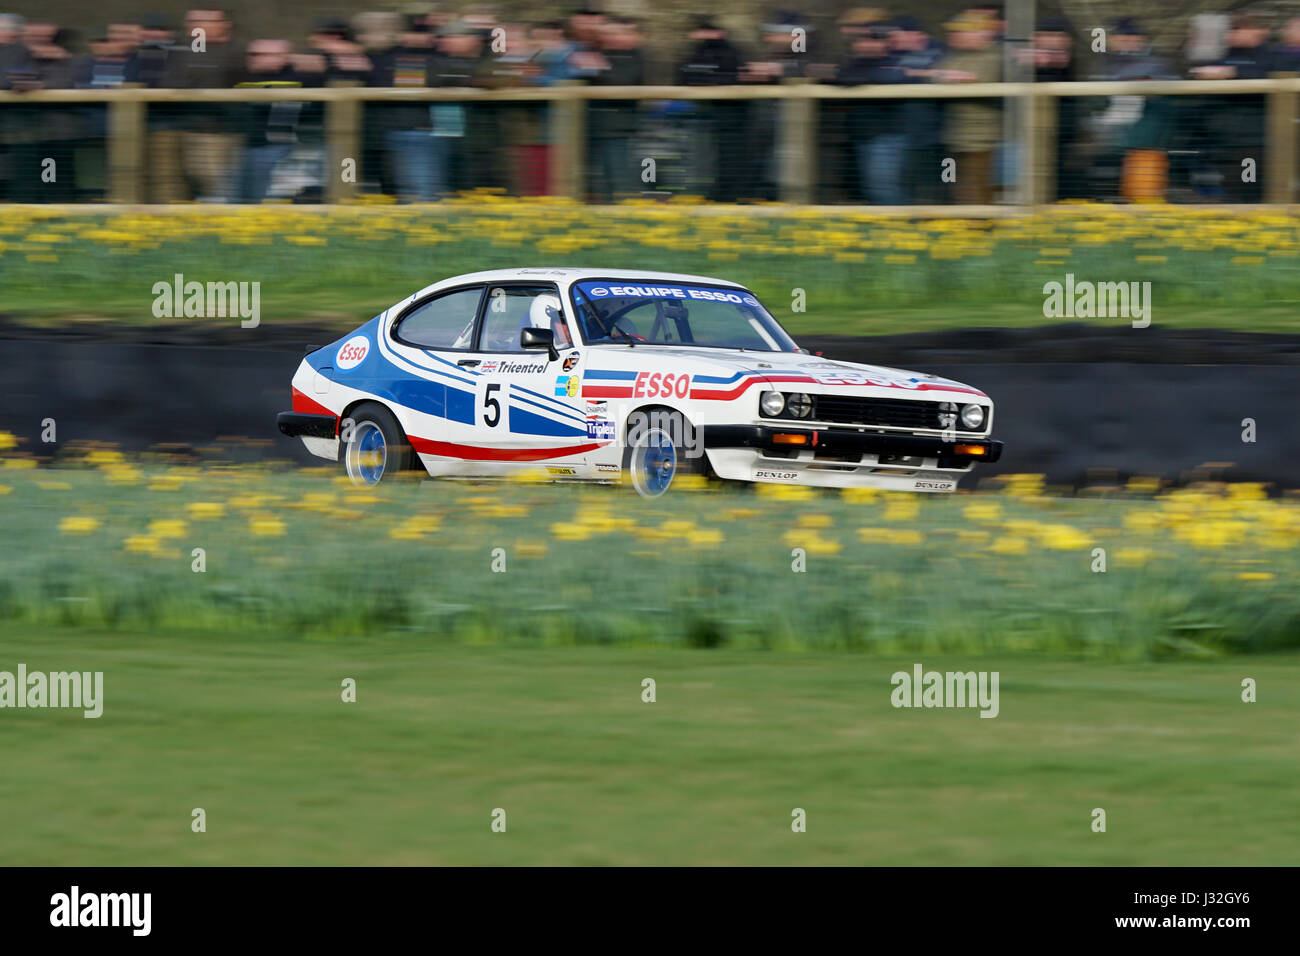 The Ford Capri 3.0 of Mark Fowler & Emanuele Pirro at speed during the 75th Goodwood Members Meeting Stock Photo